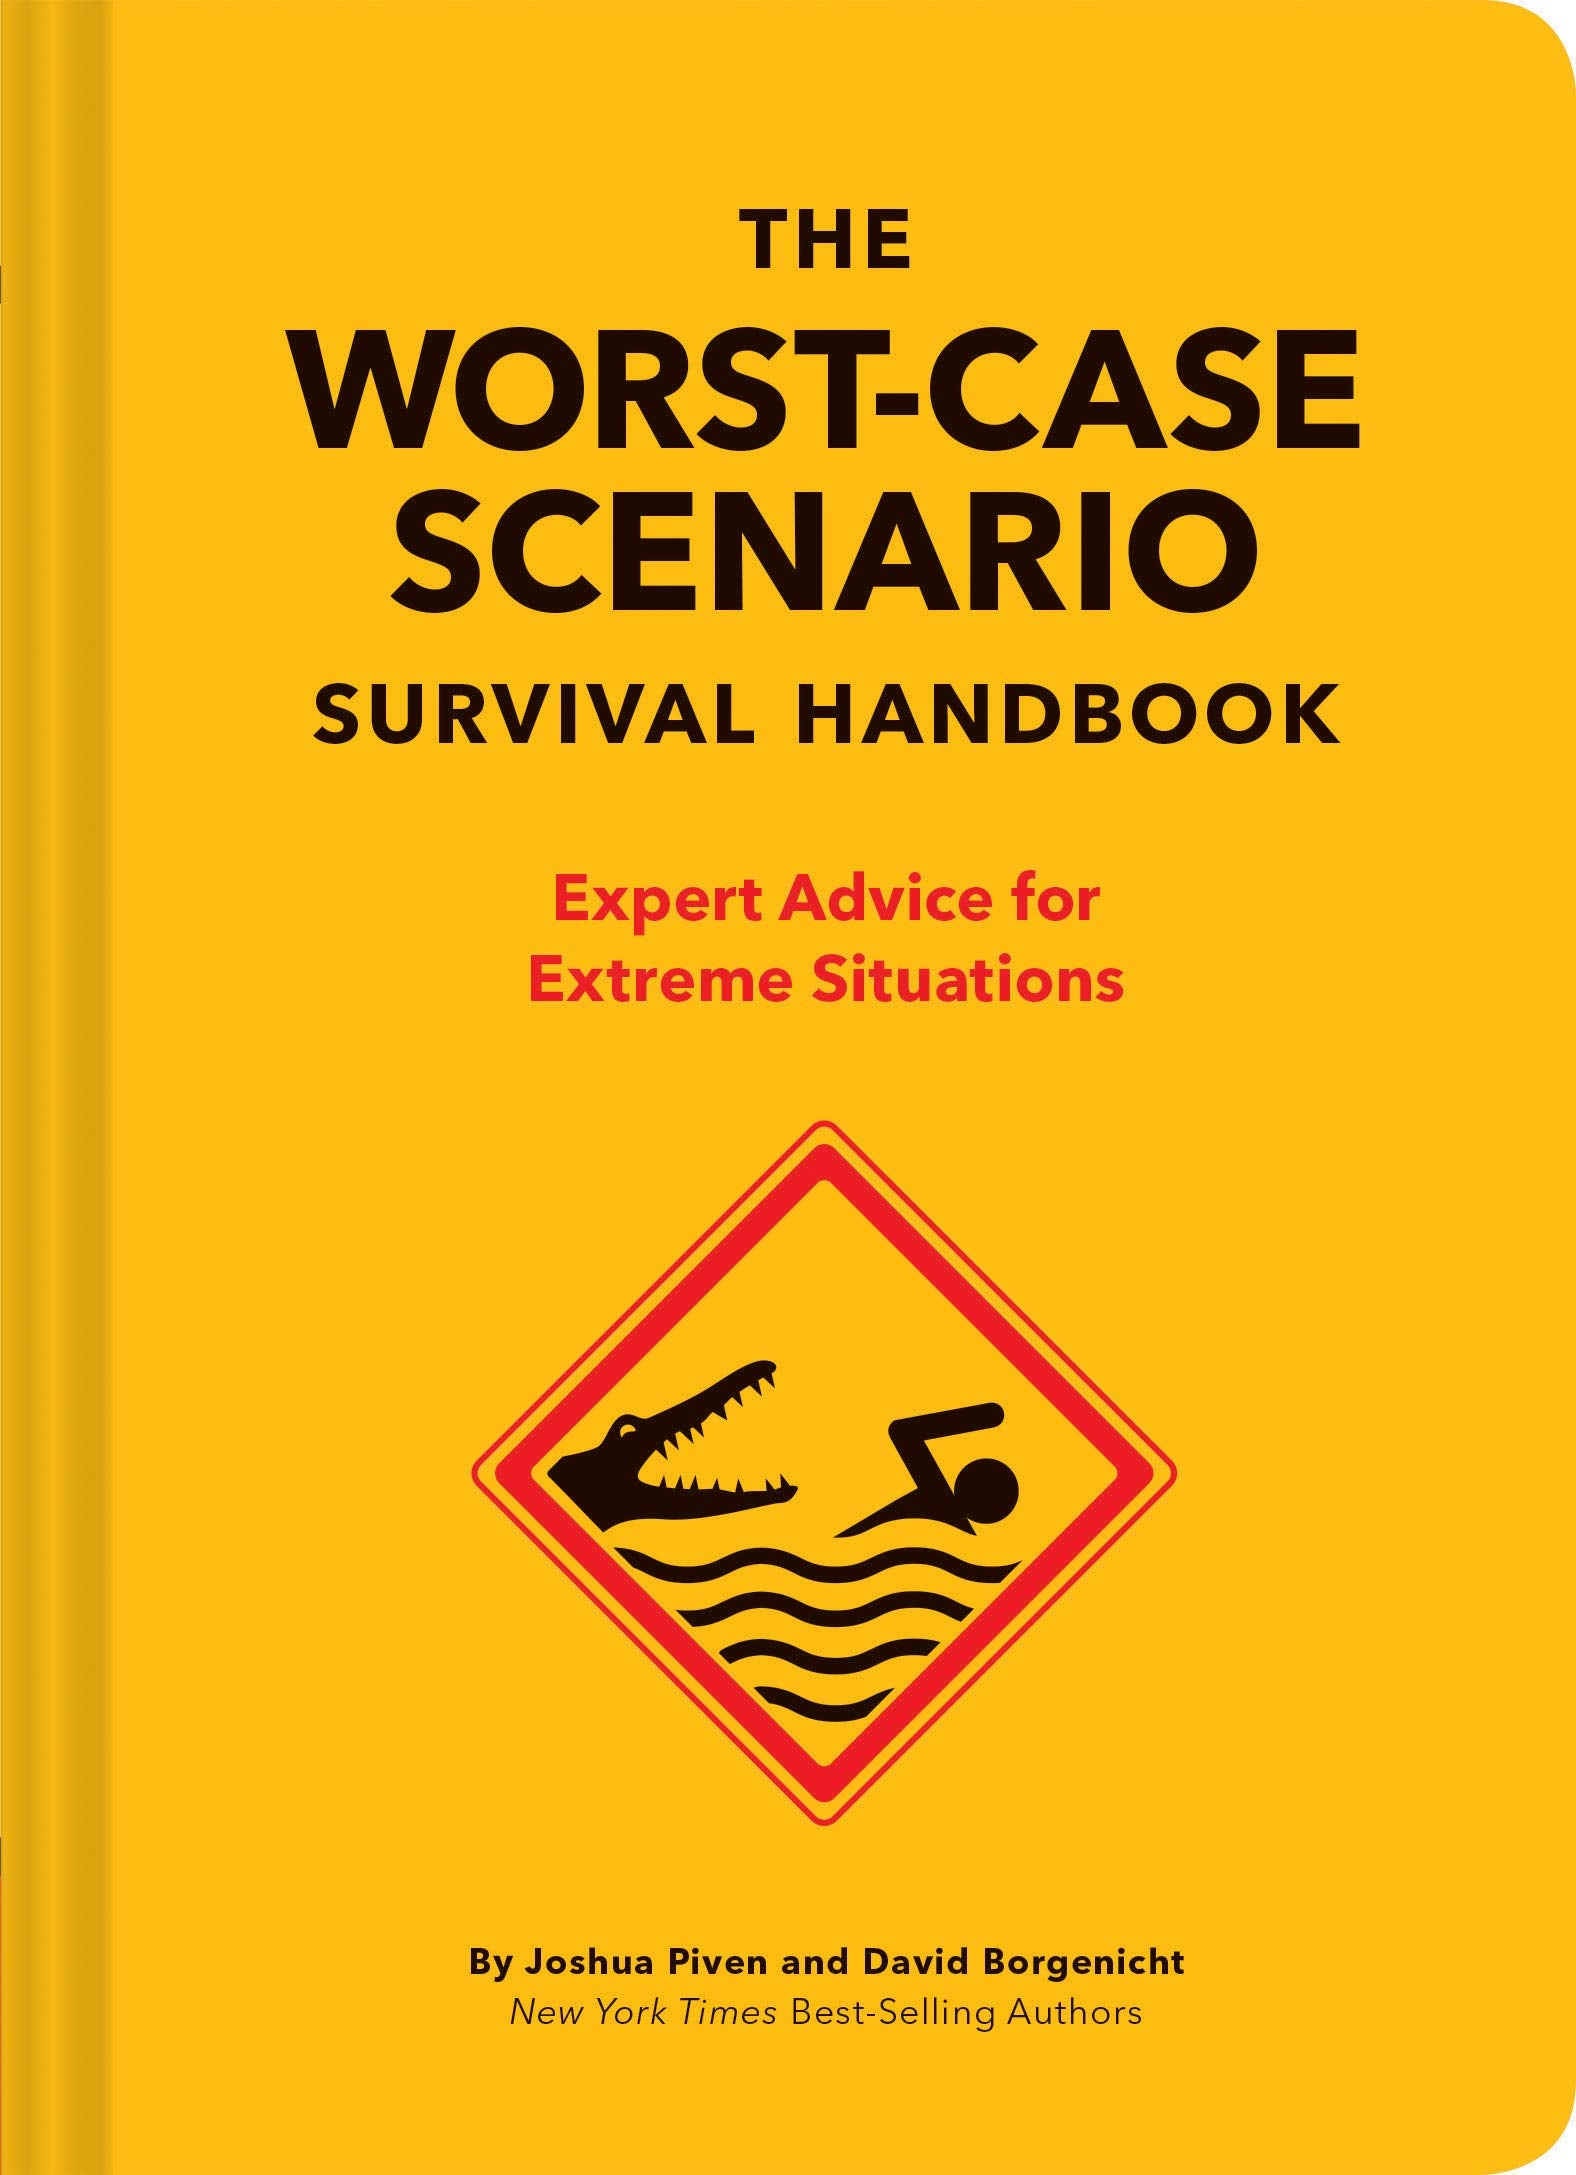 yellow book cover with graphic of warning sign with crocodile and person swimming, title, and authors name